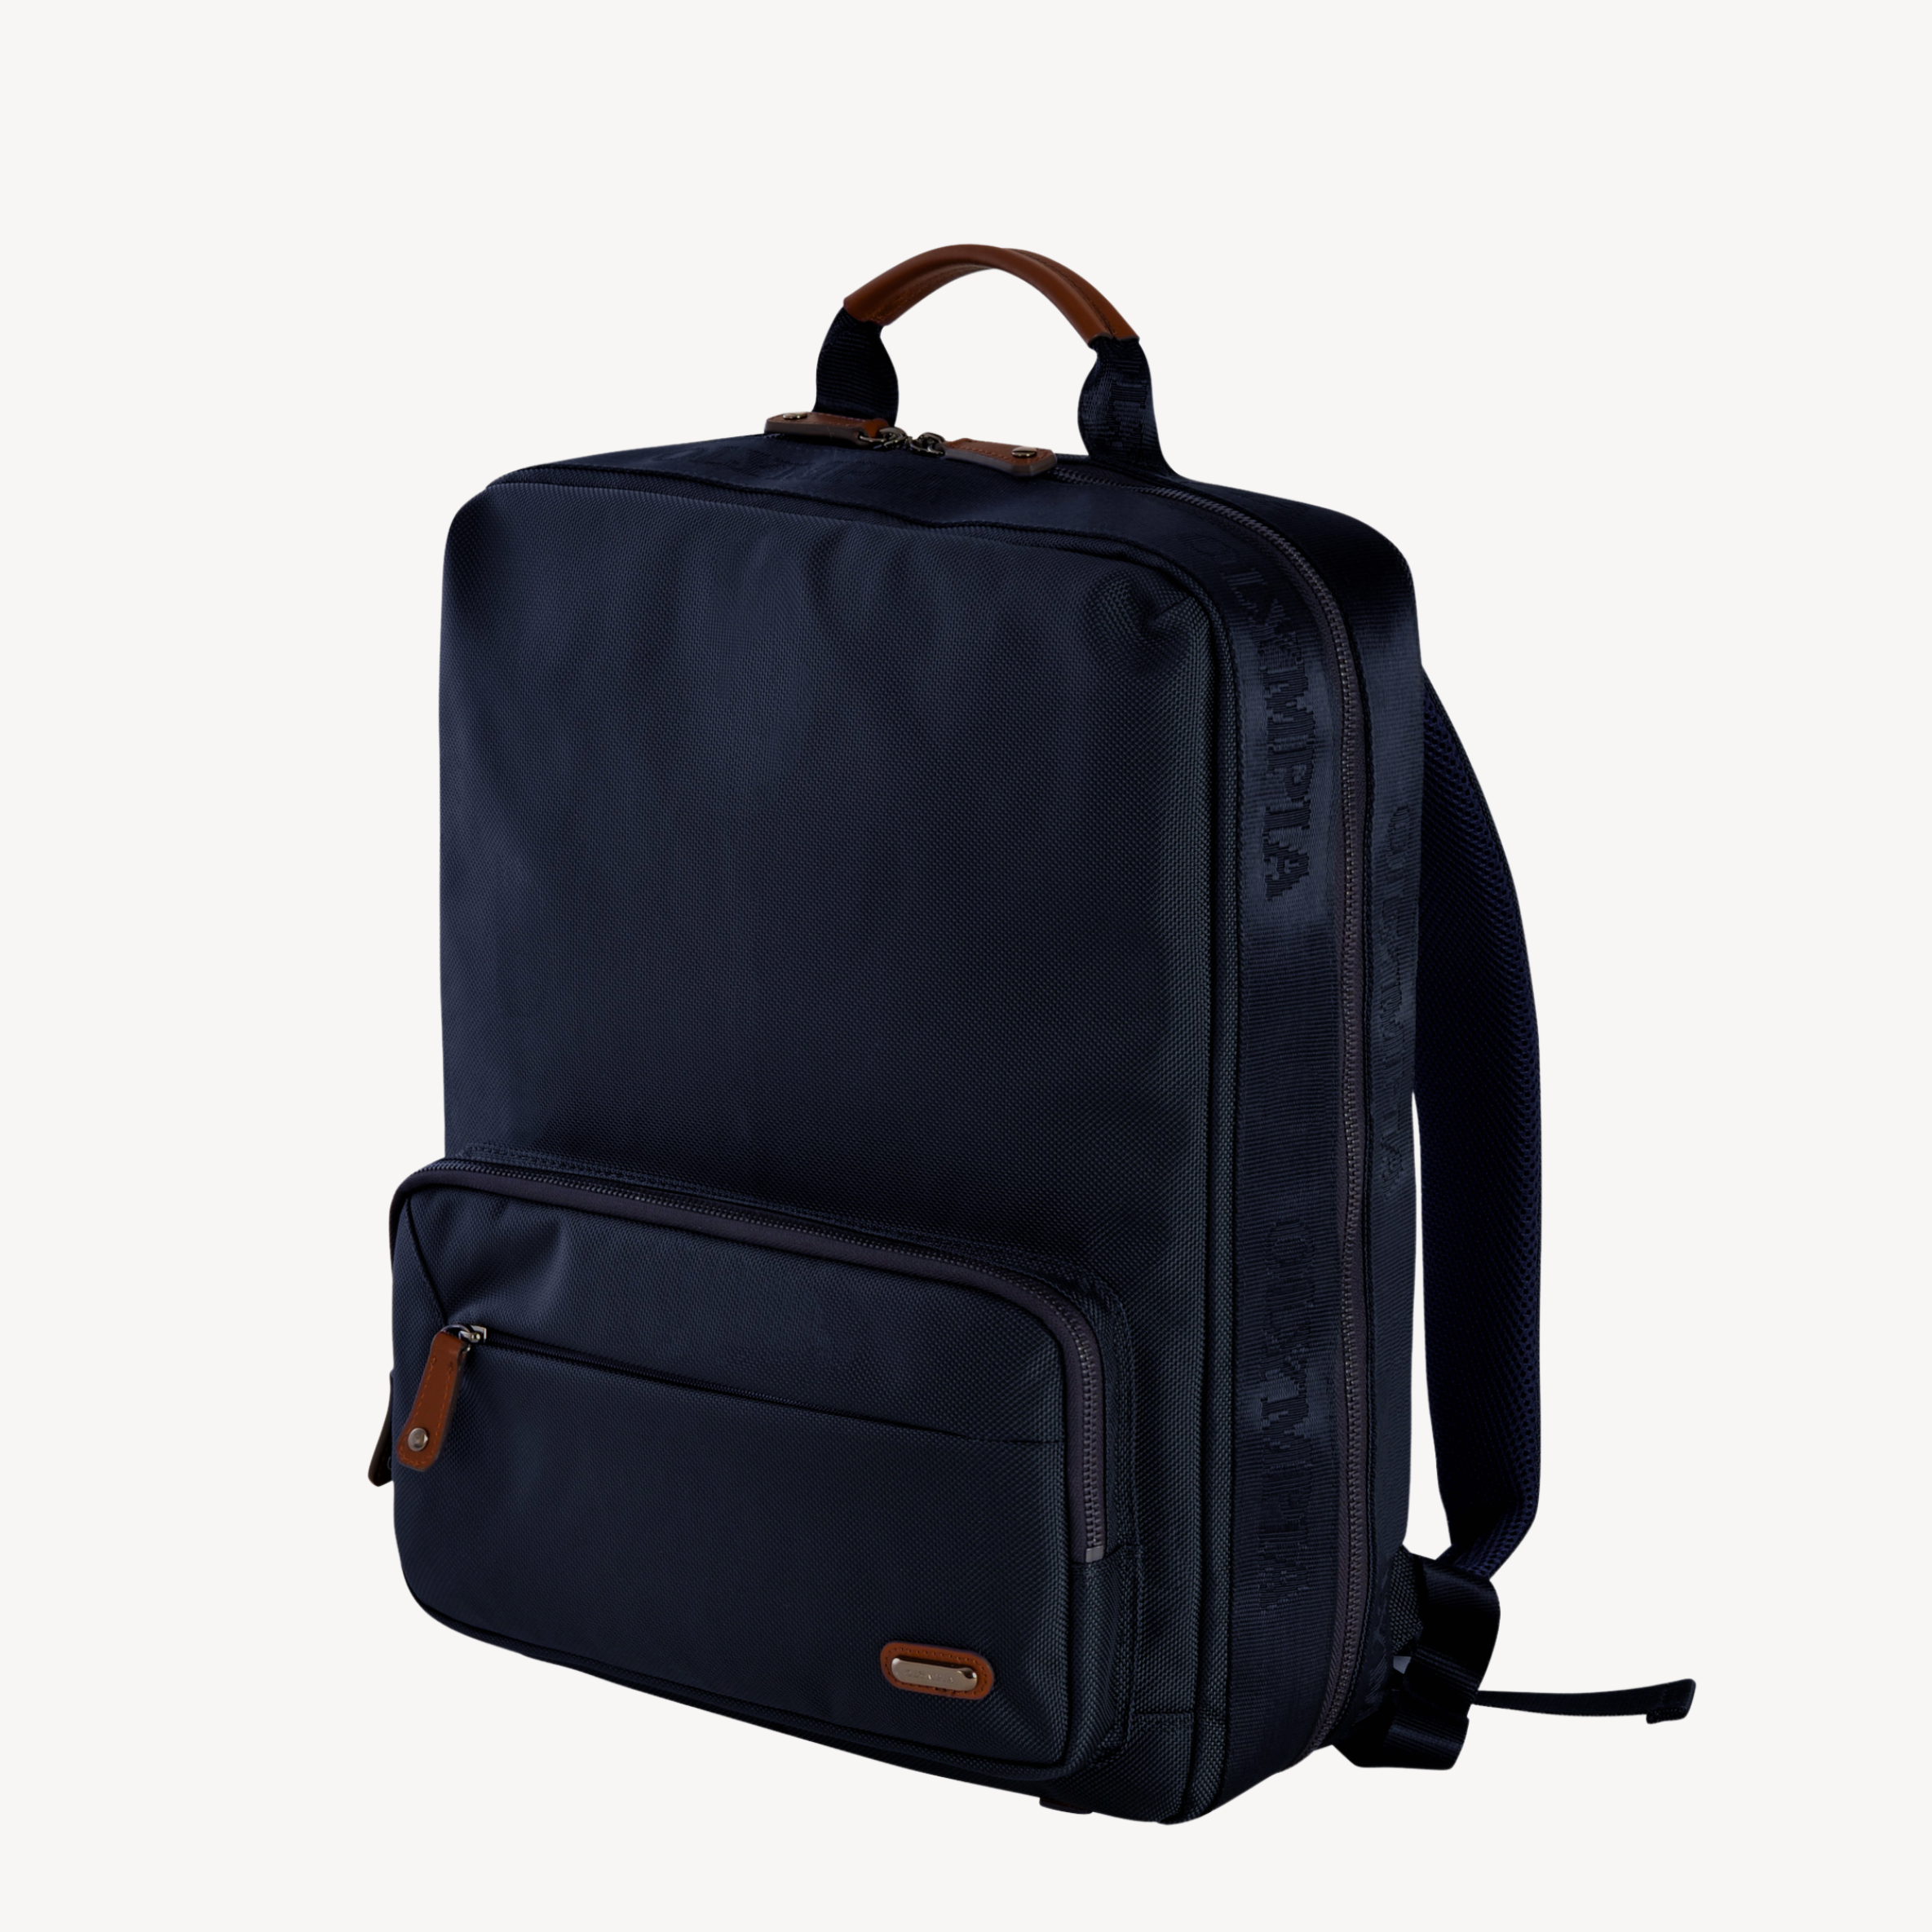 Rhodes Premium Water-Resistant Laptop Bag with Heavy Padding for Ultimate Protection